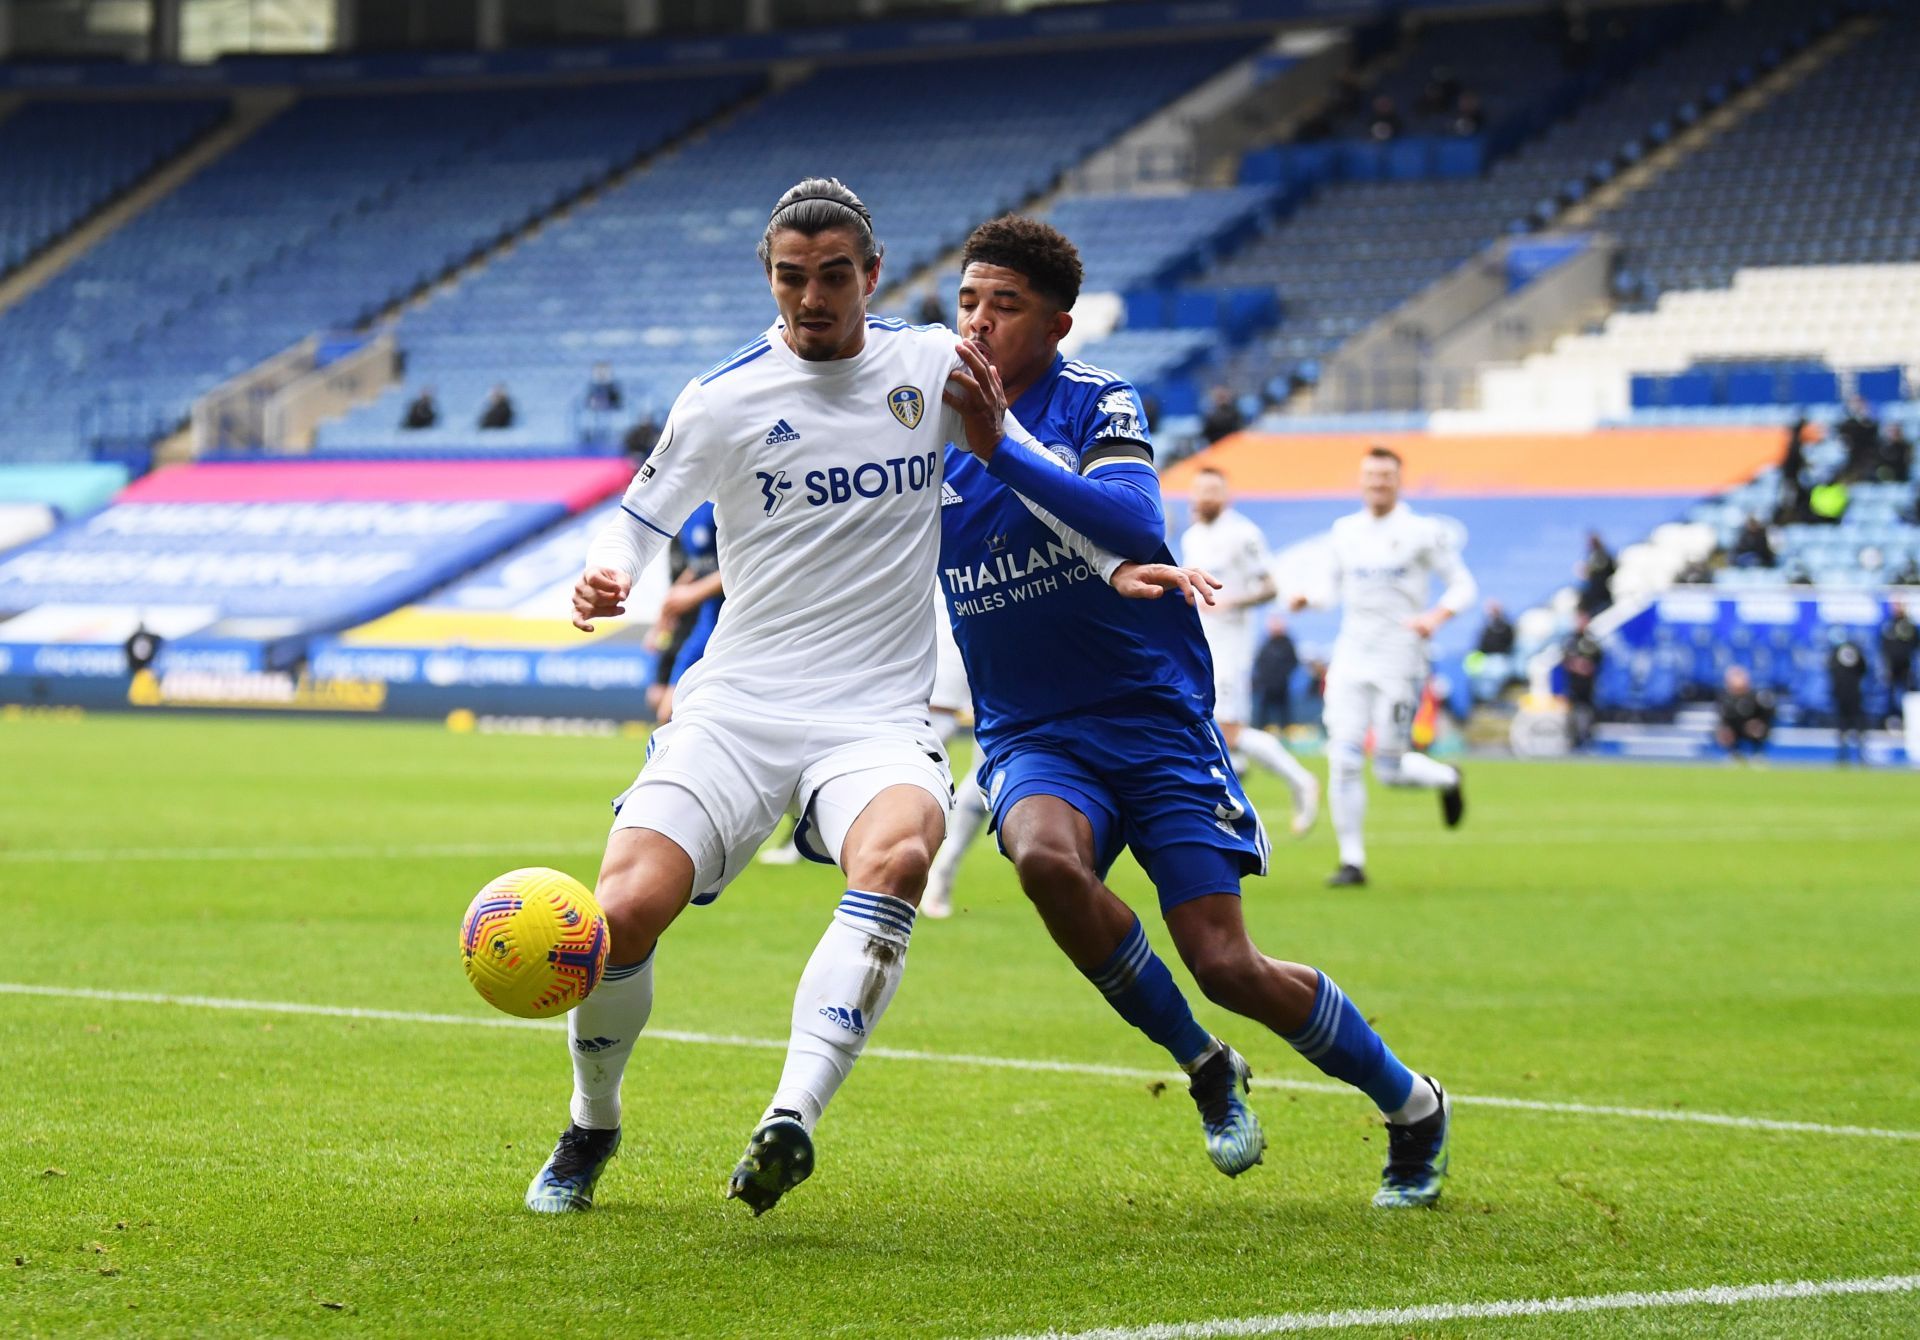 Struijk (right) of Leeds United in the game against Leicester City